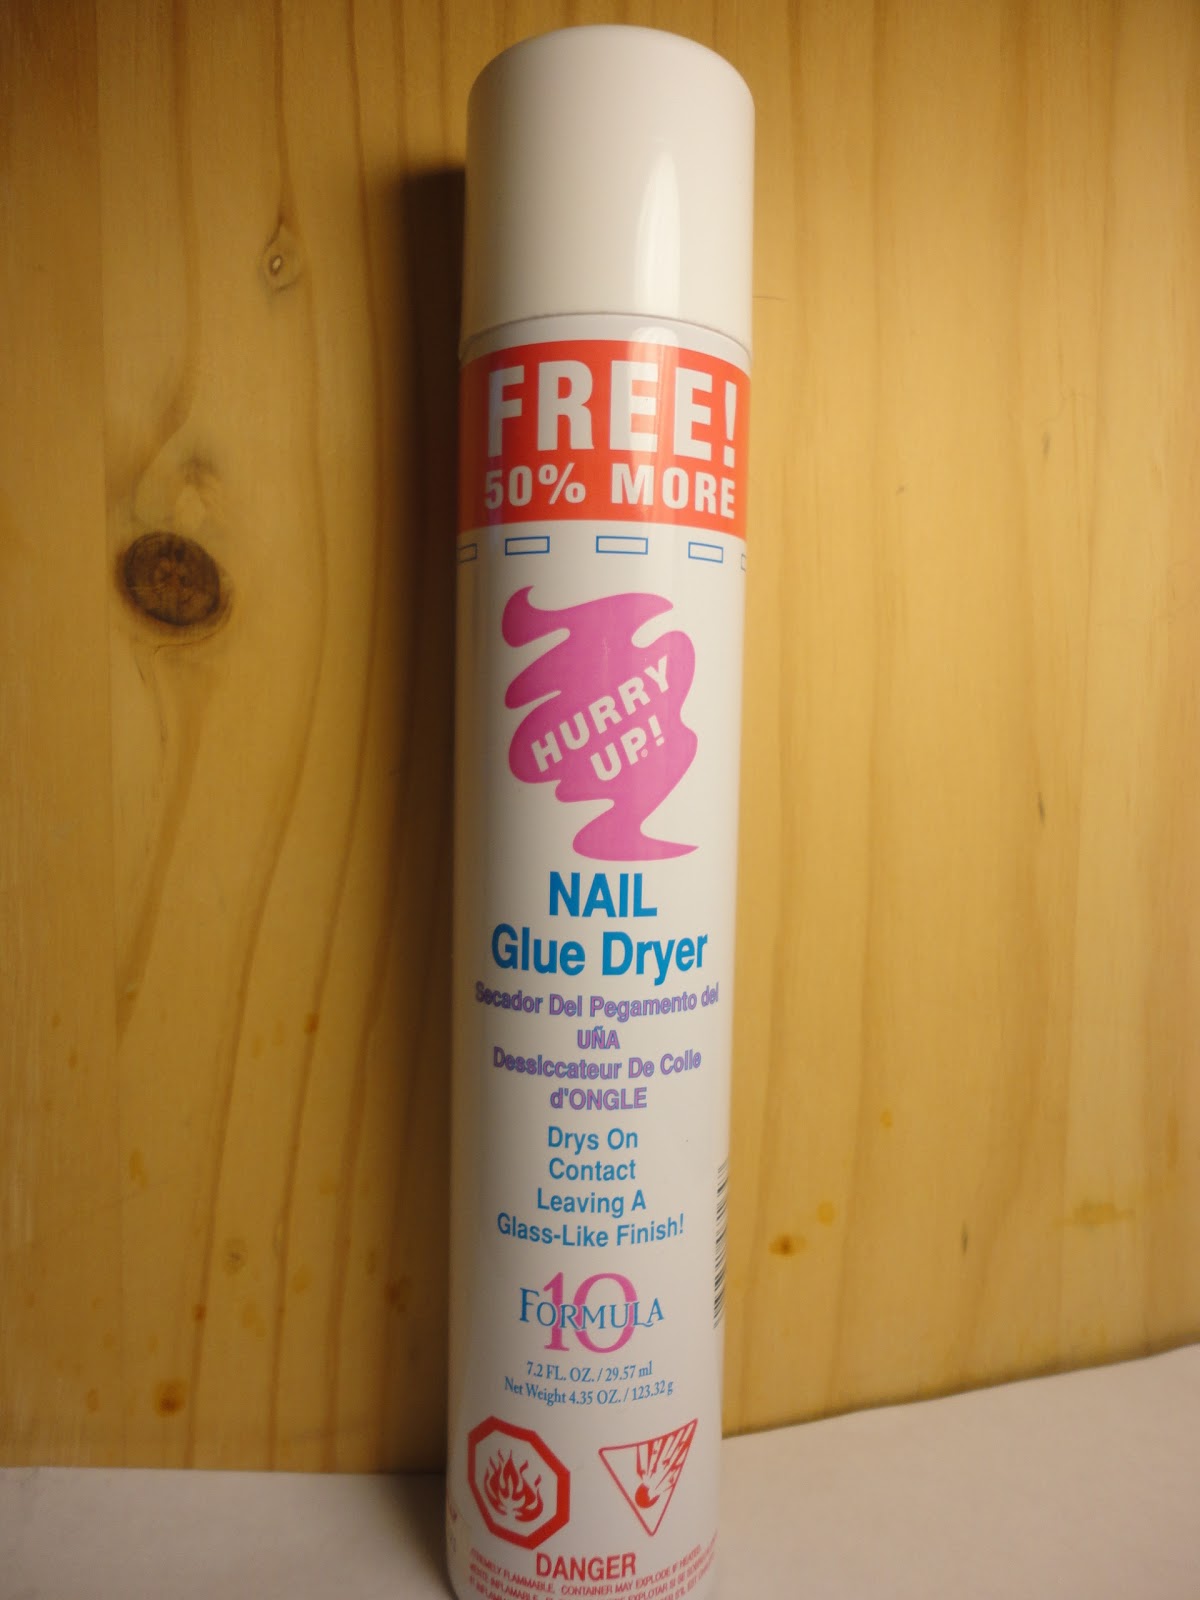 Hurry Up! Nail Glue Dryer. Spray this on your last coat to instantly dry